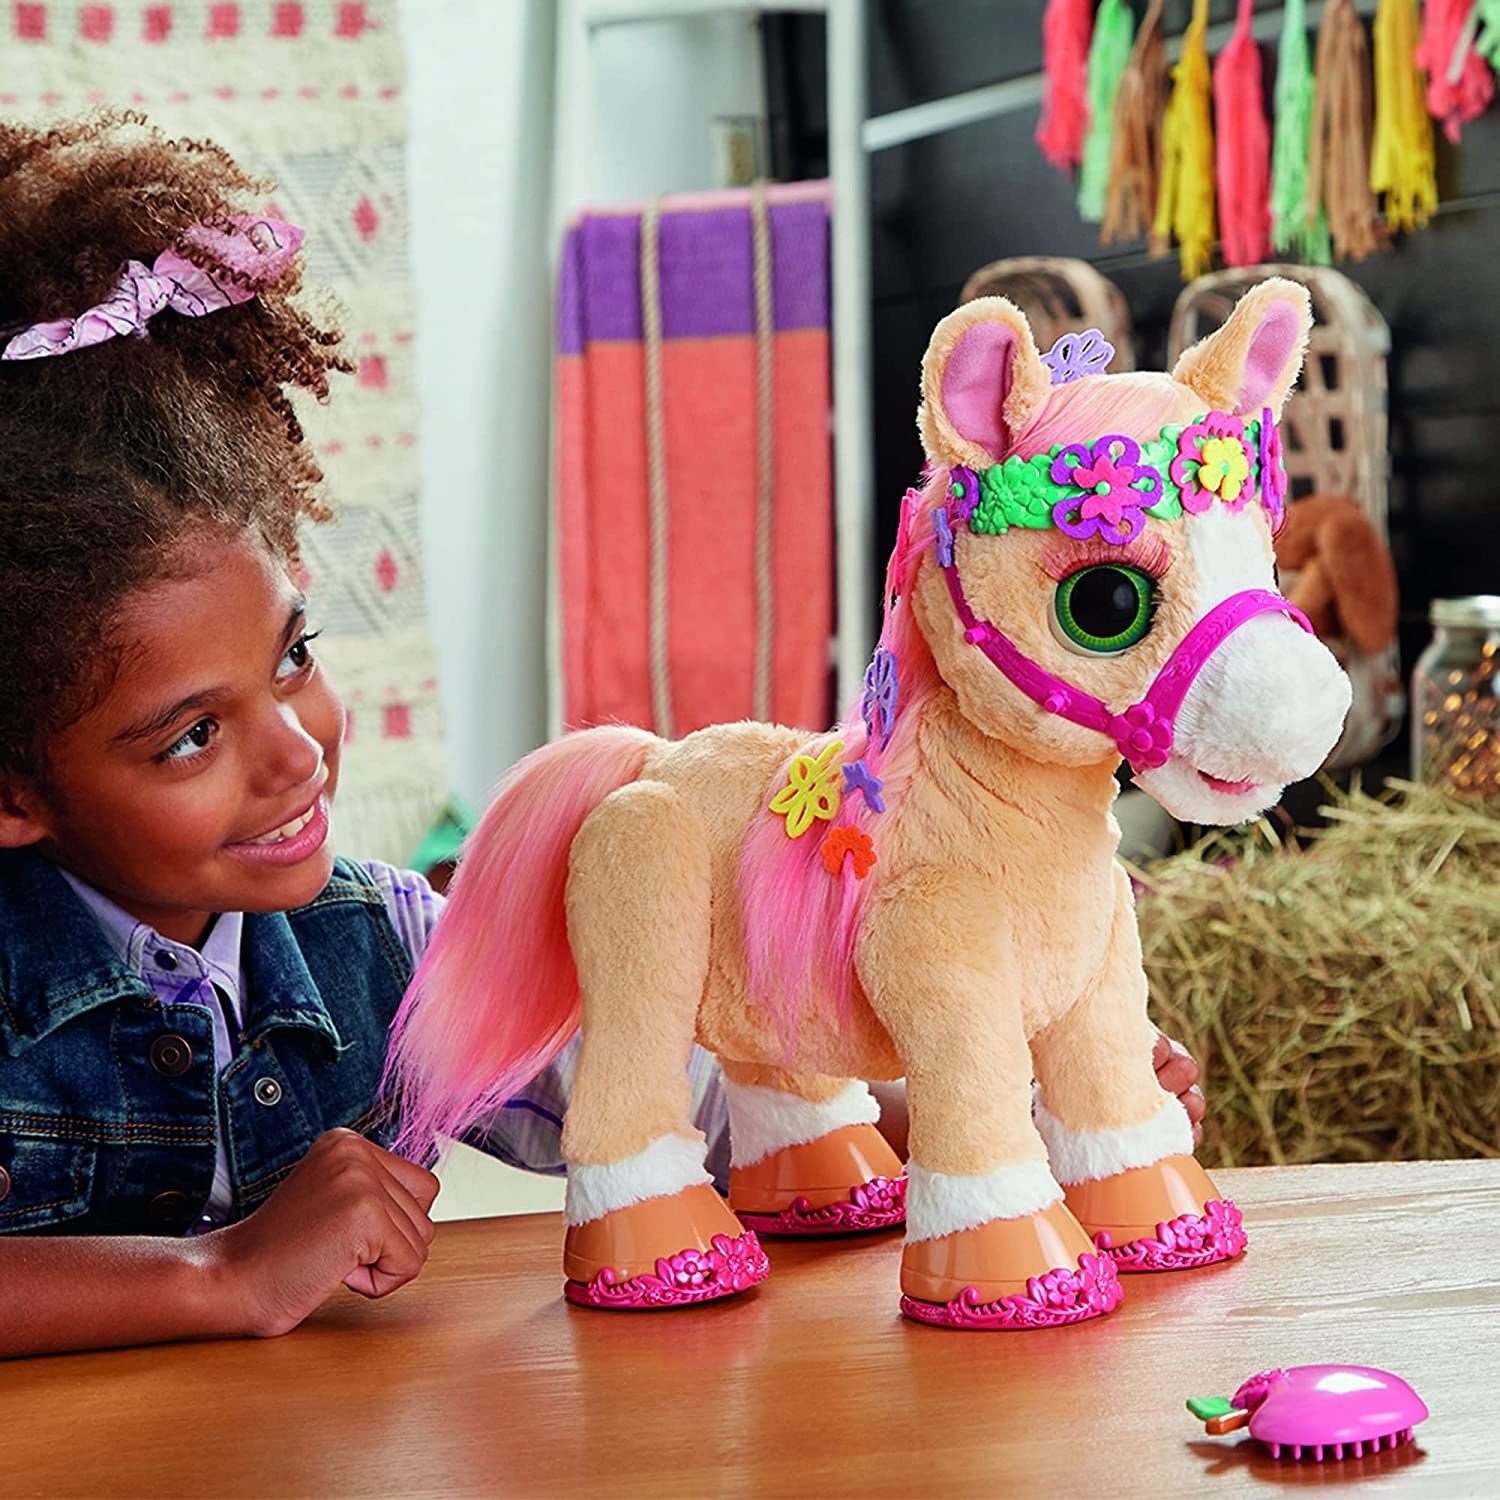 a child playing with the horse while the horse is wearing accessories